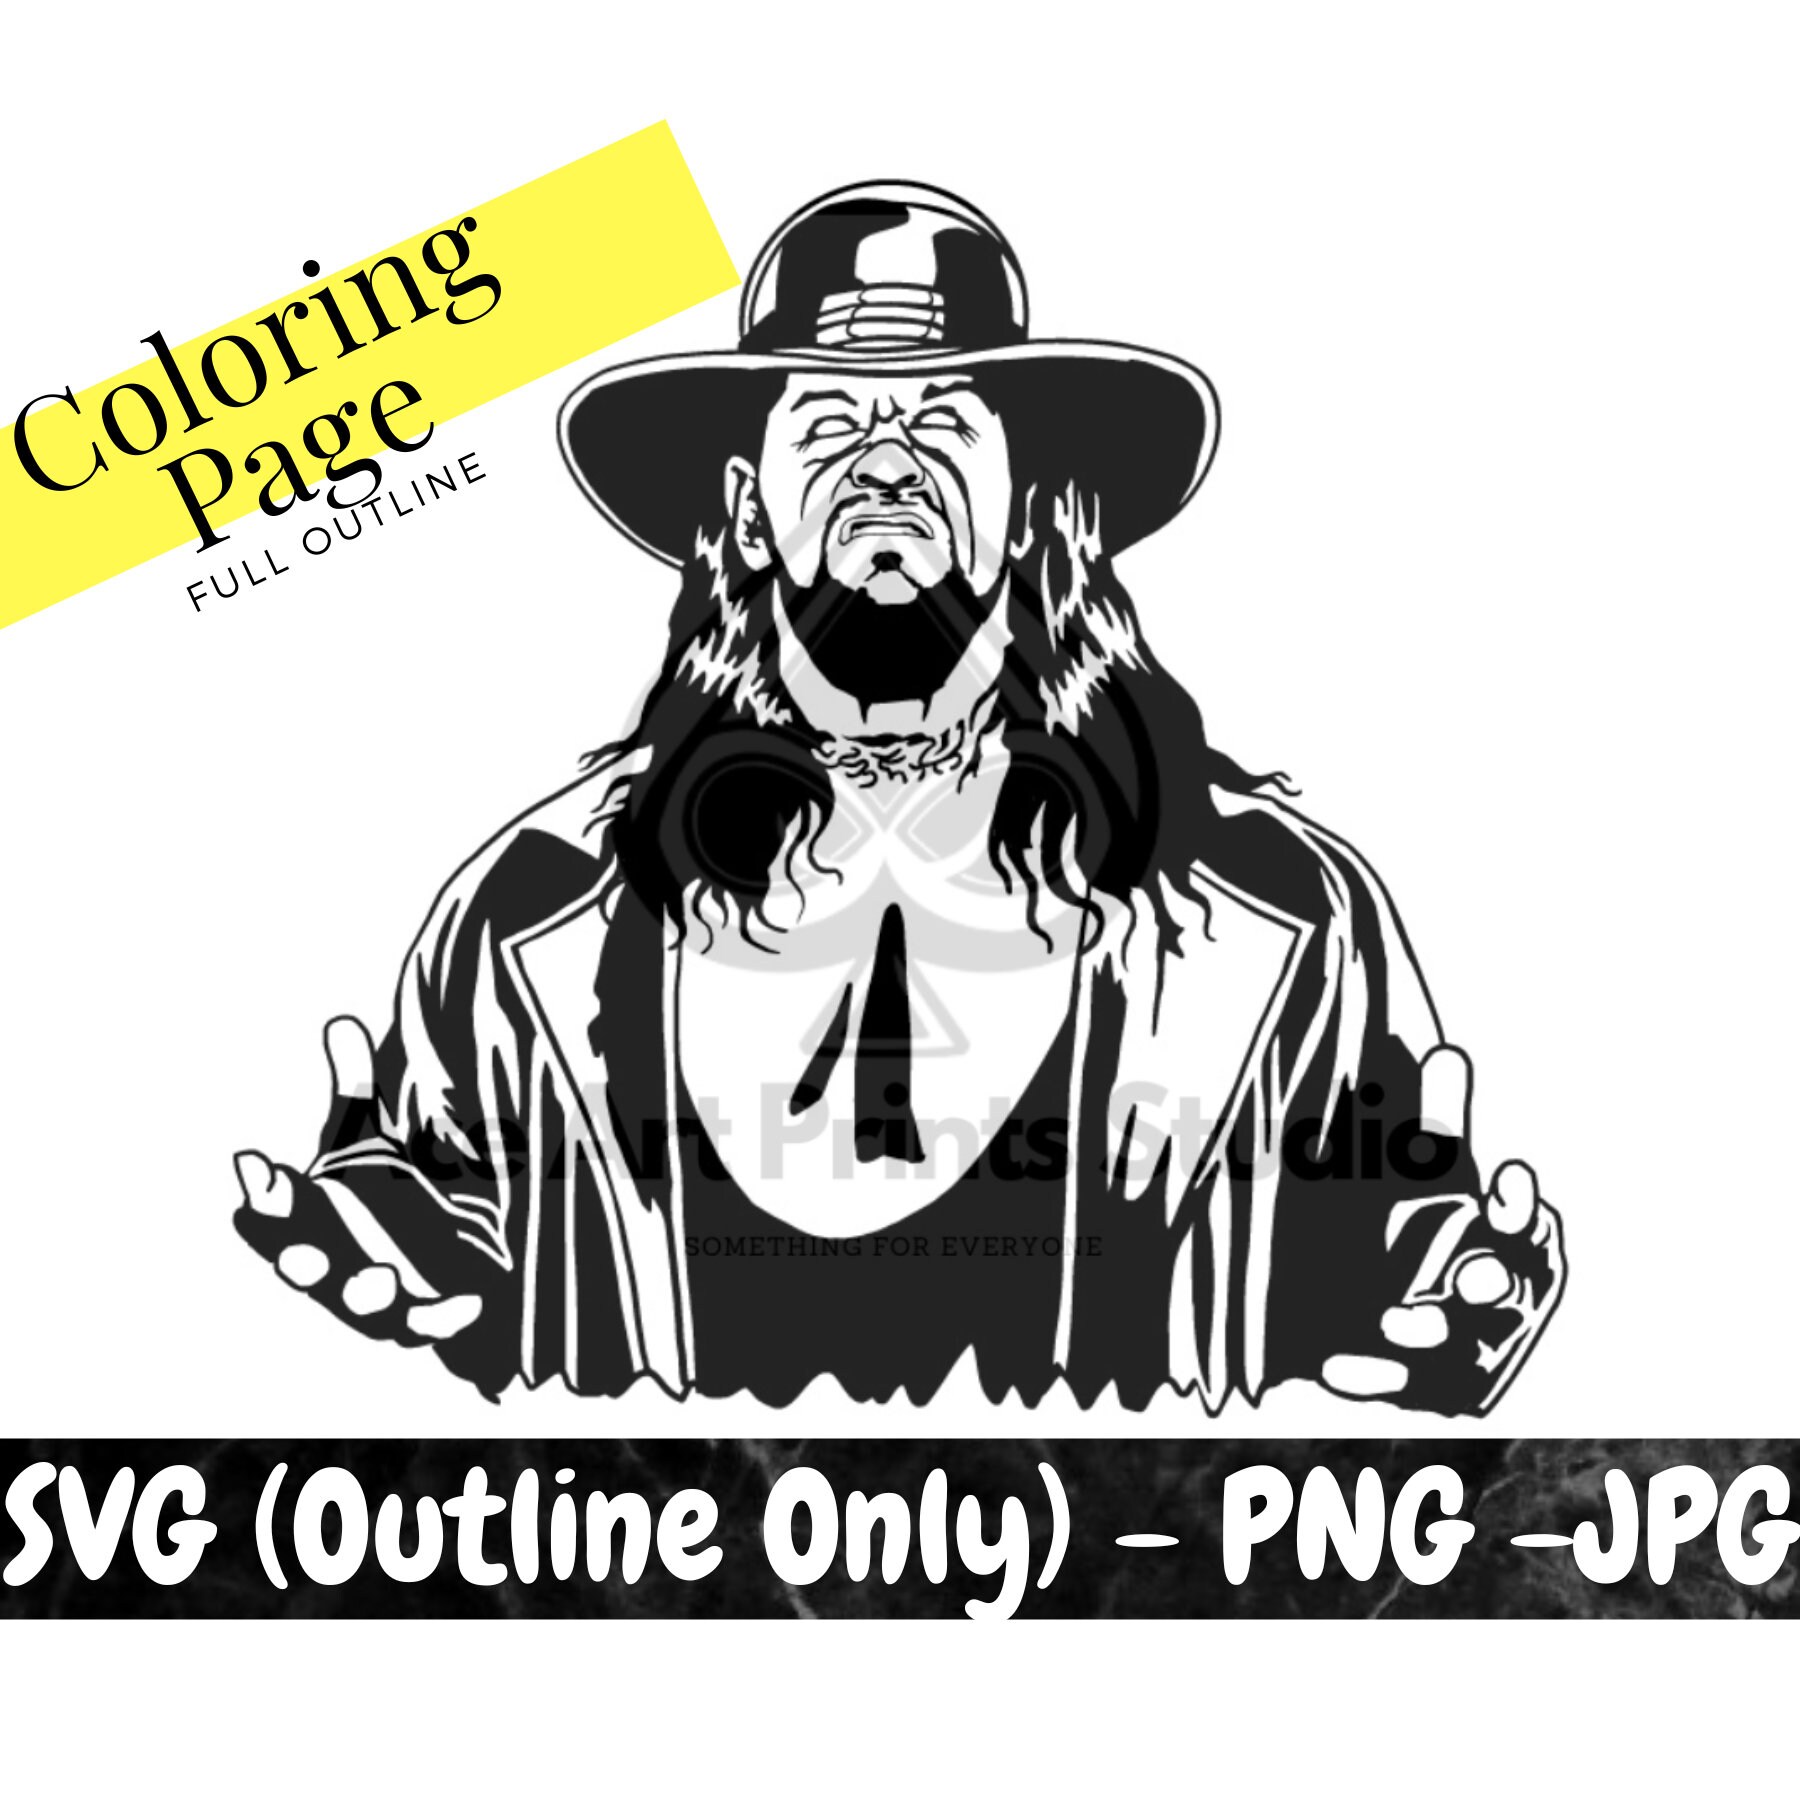 the undertaker coloring pages